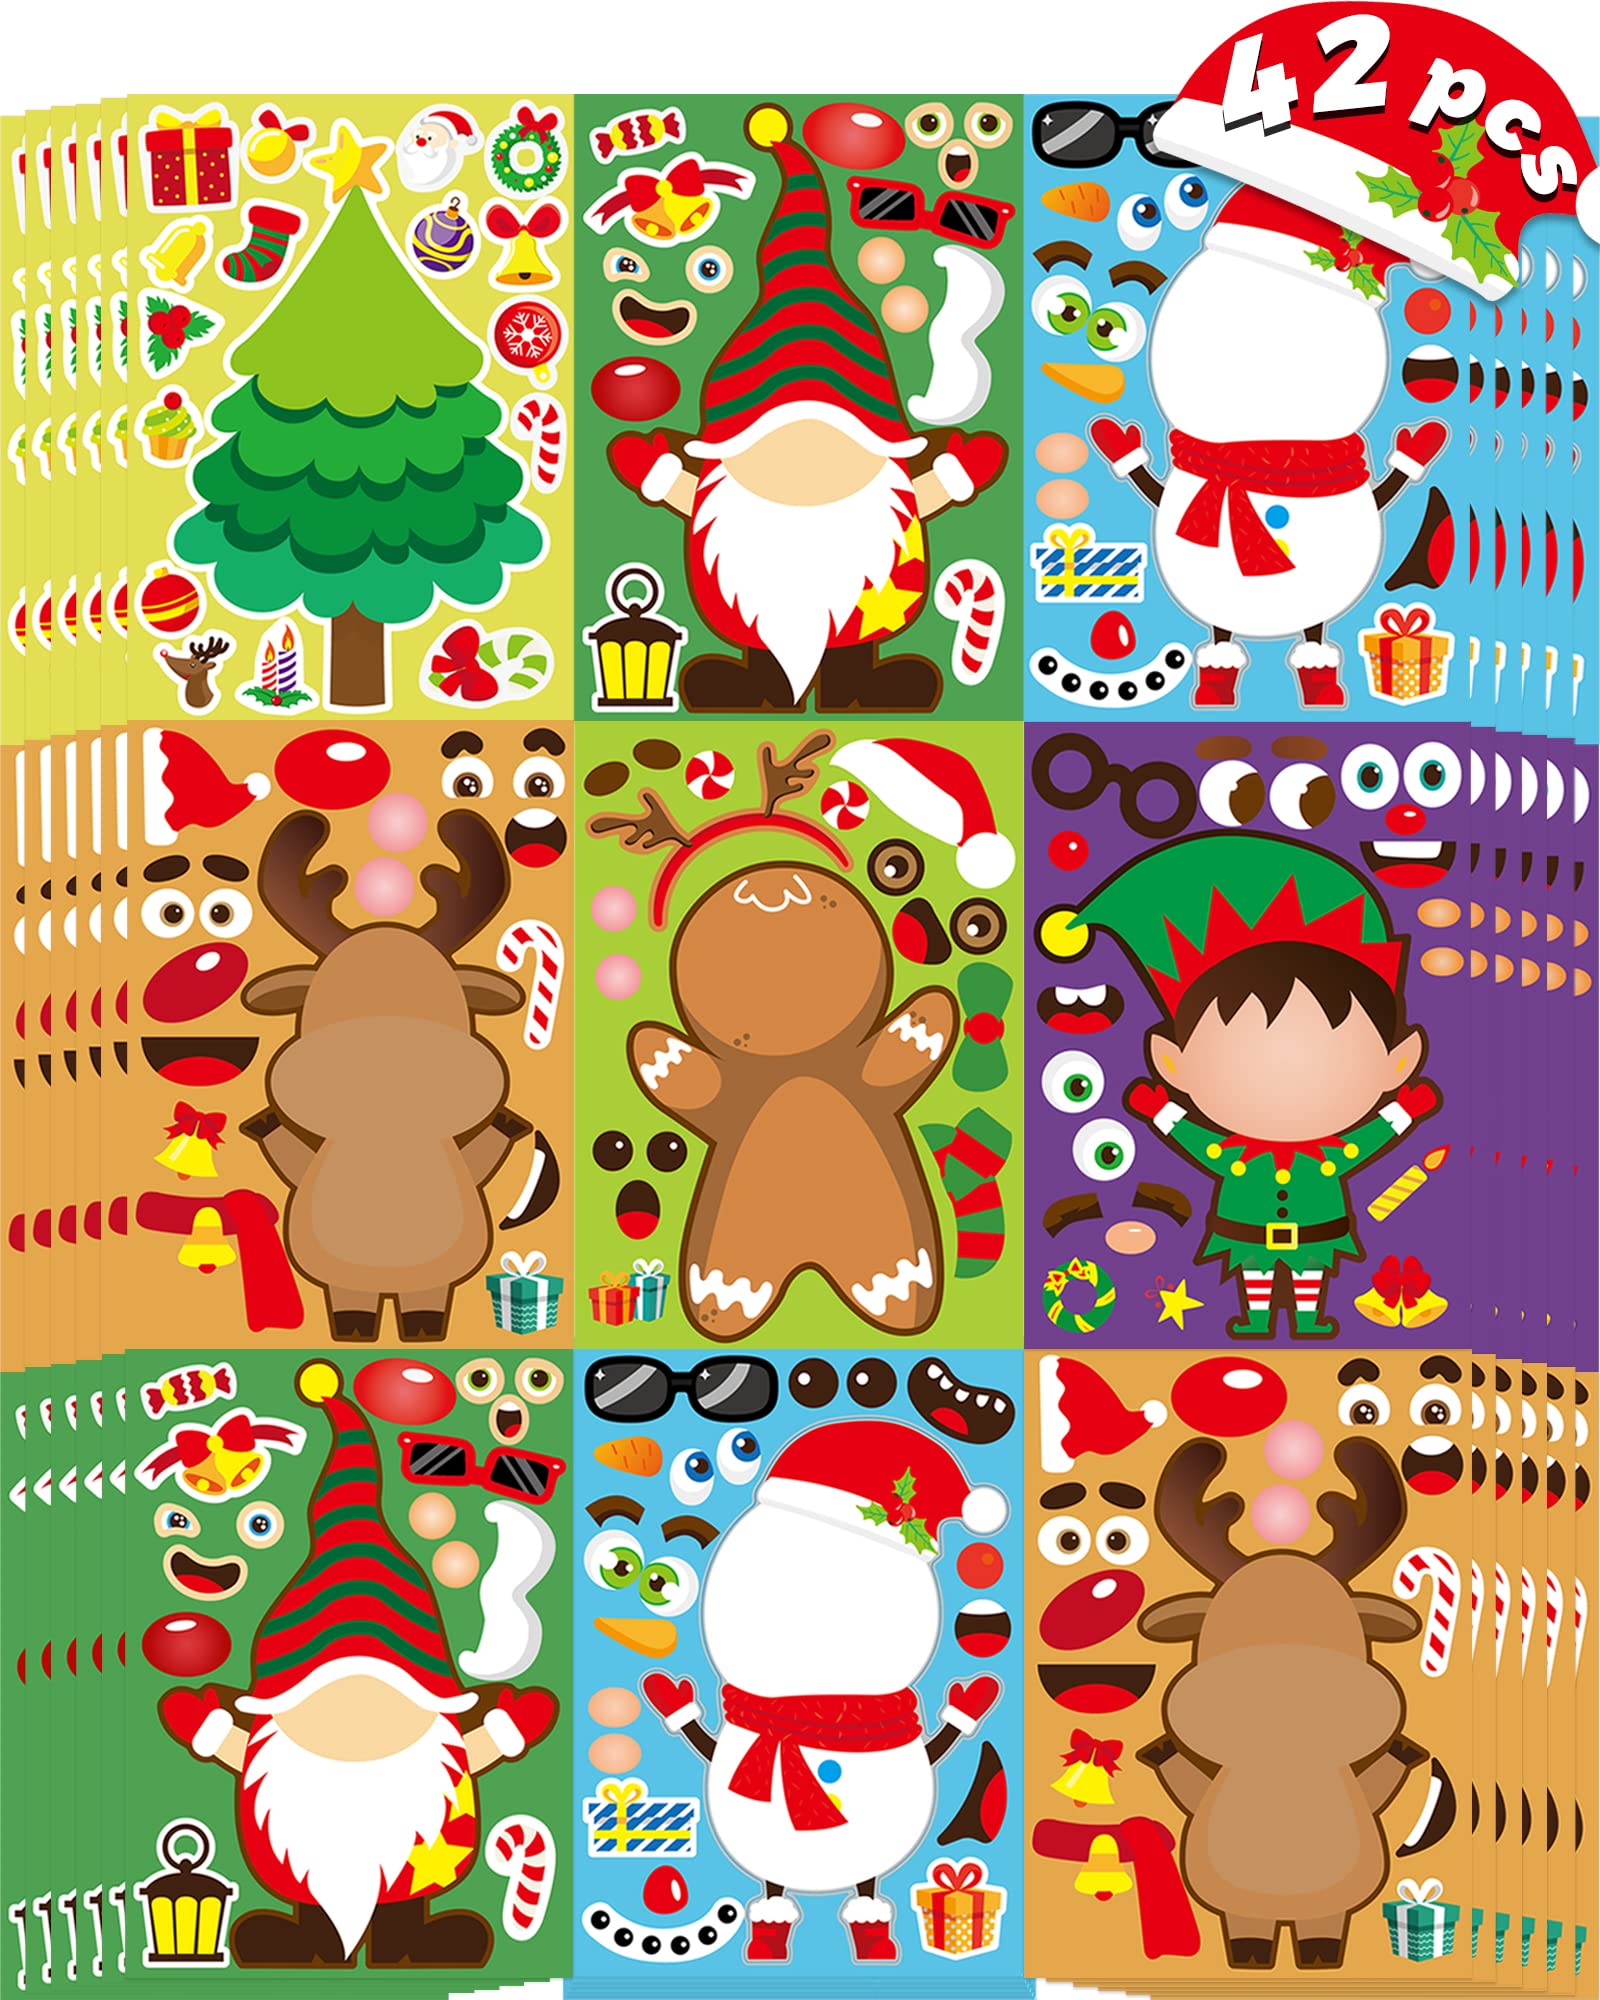  Christmas Inspirational Vinyl Stickers for Crafts